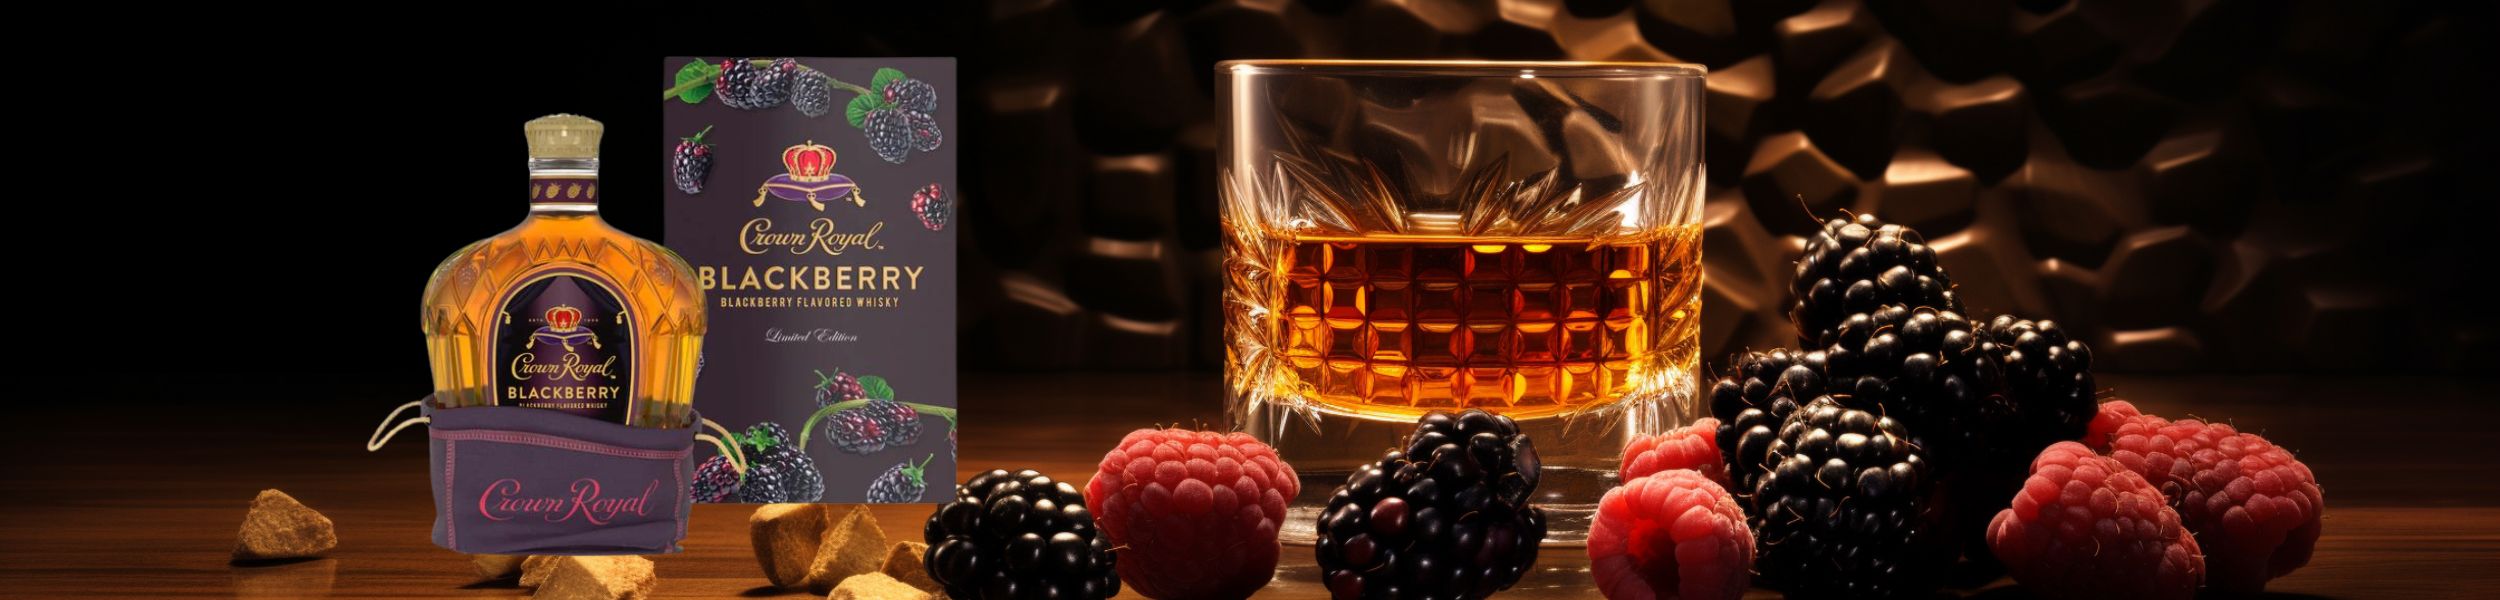 Exploring the Rich Flavors of Crown Royal Blackberry Flavored Canadian